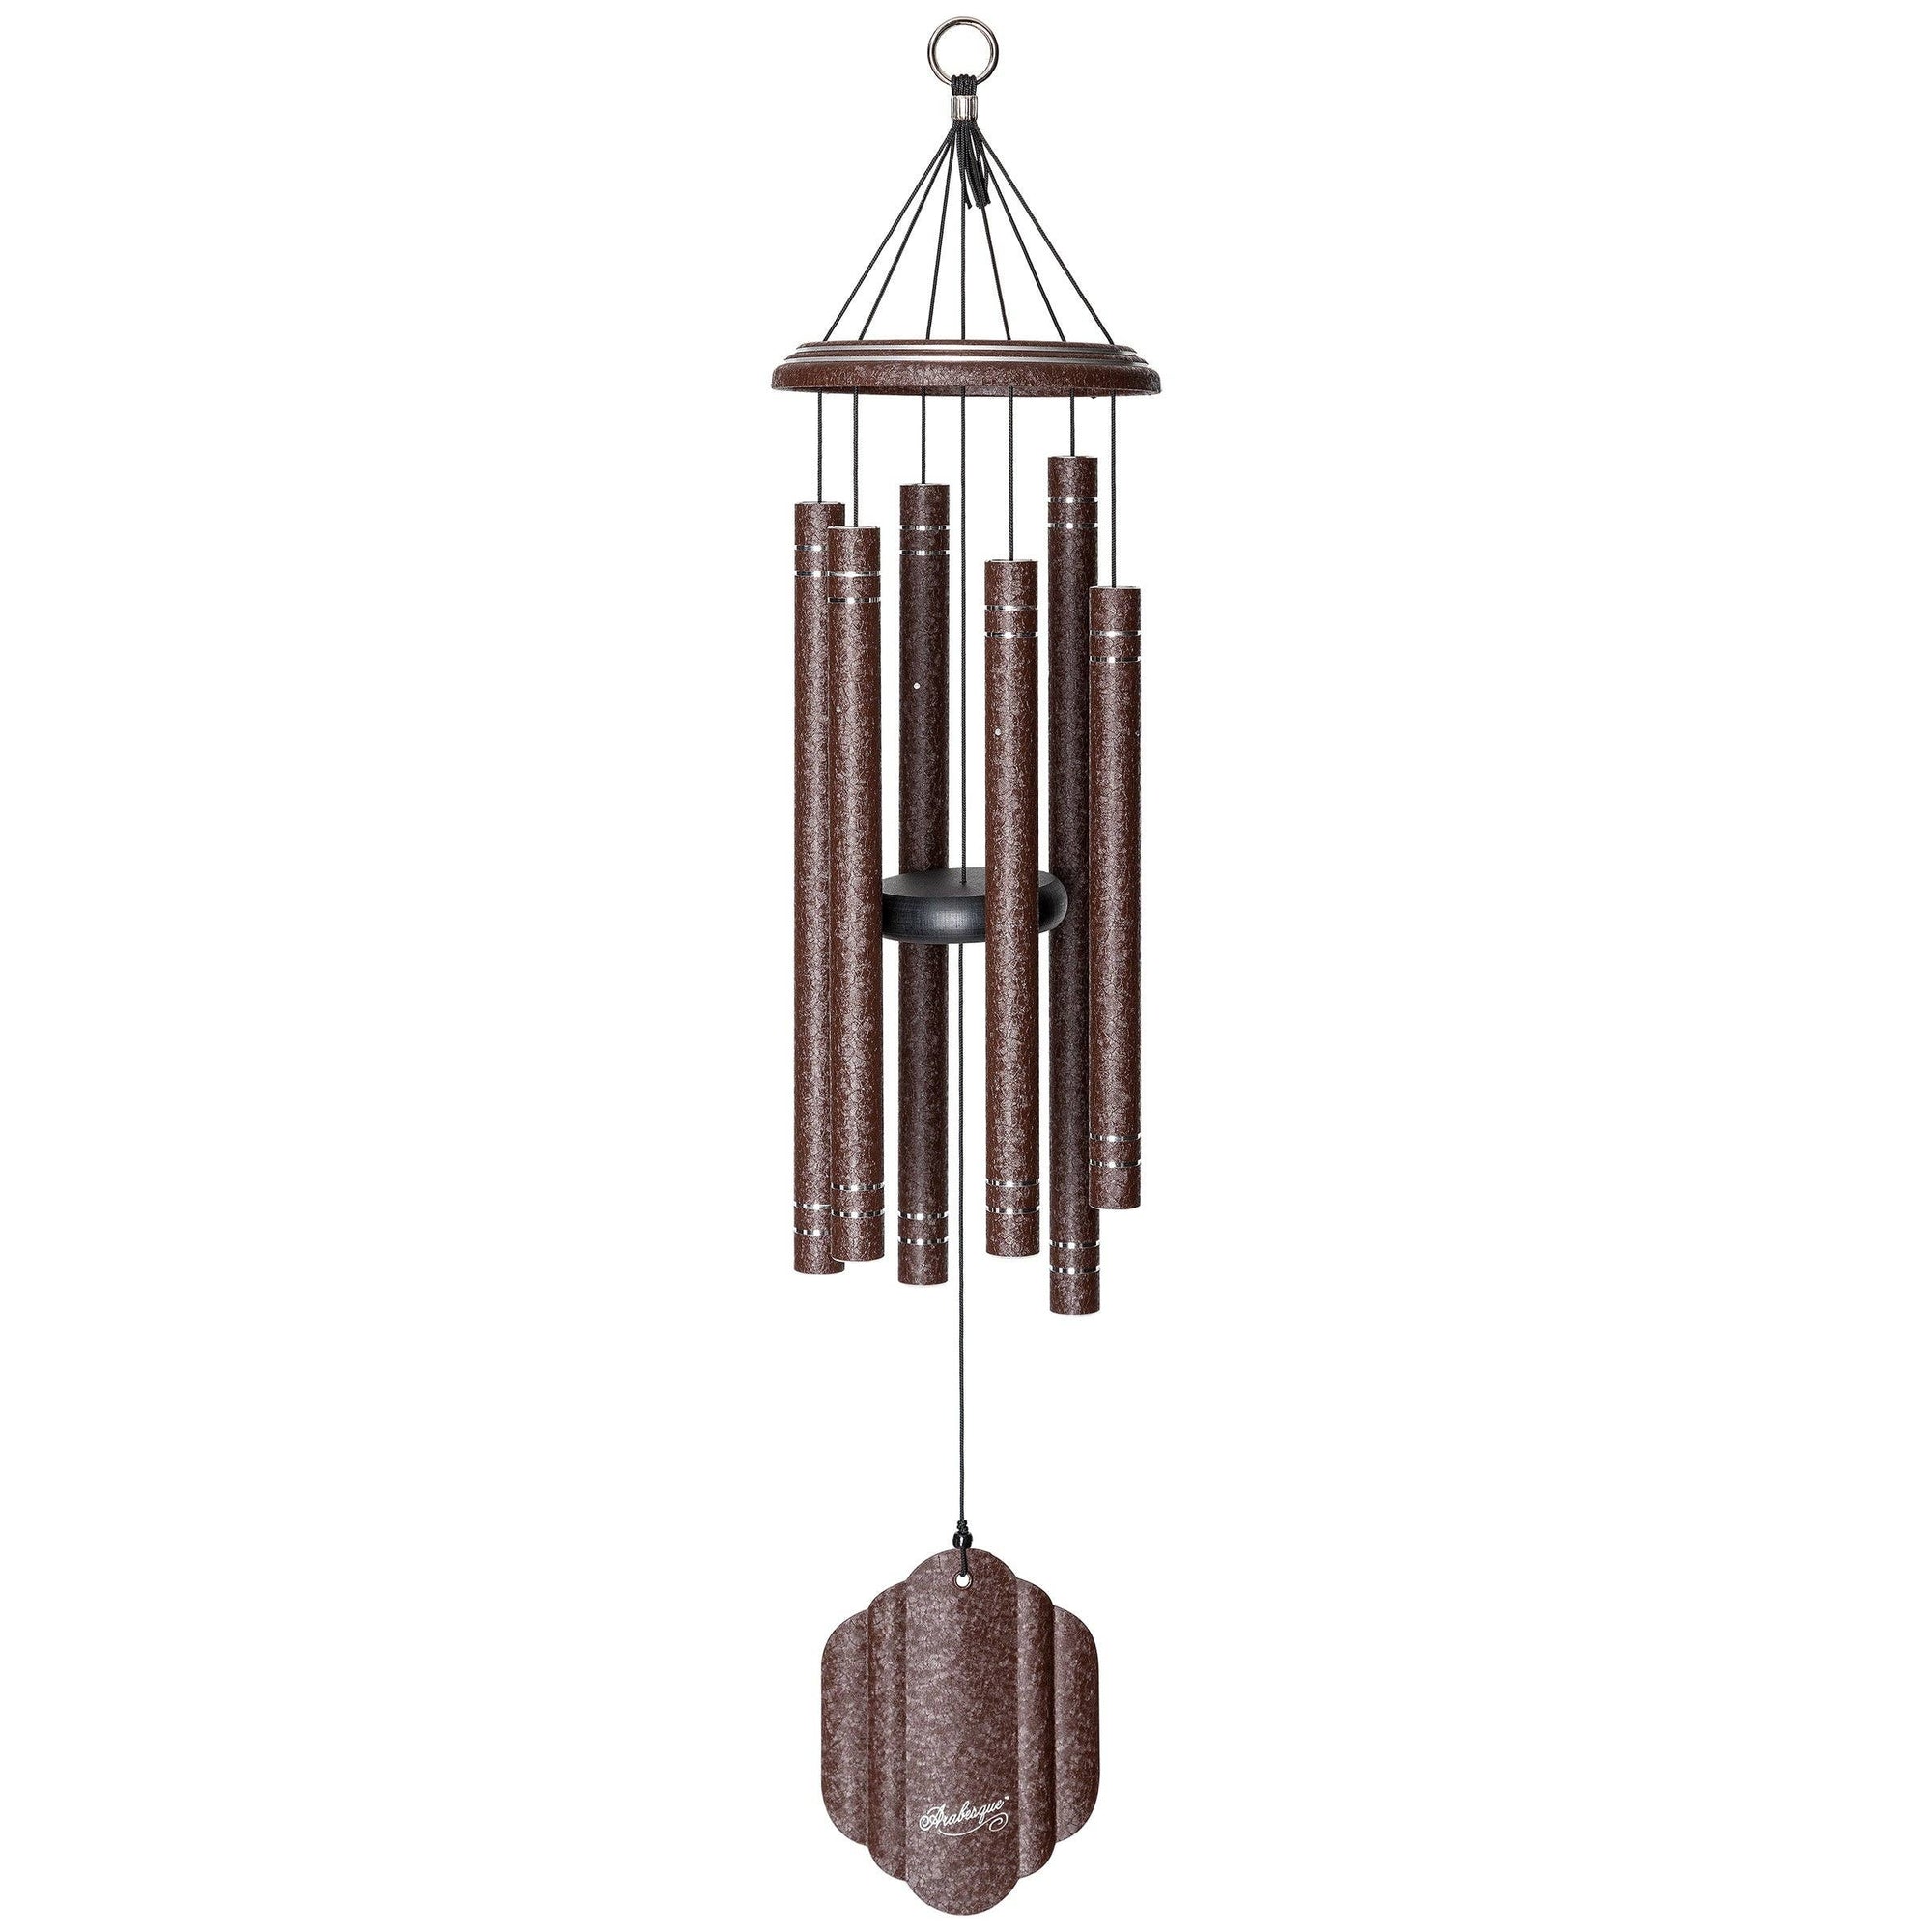 An elegant 32" Windchime Arabesque® hanging on a serene white background, boasting a design that harmoniously combines beauty and functionality, producing mesmerizing high-quality sound.